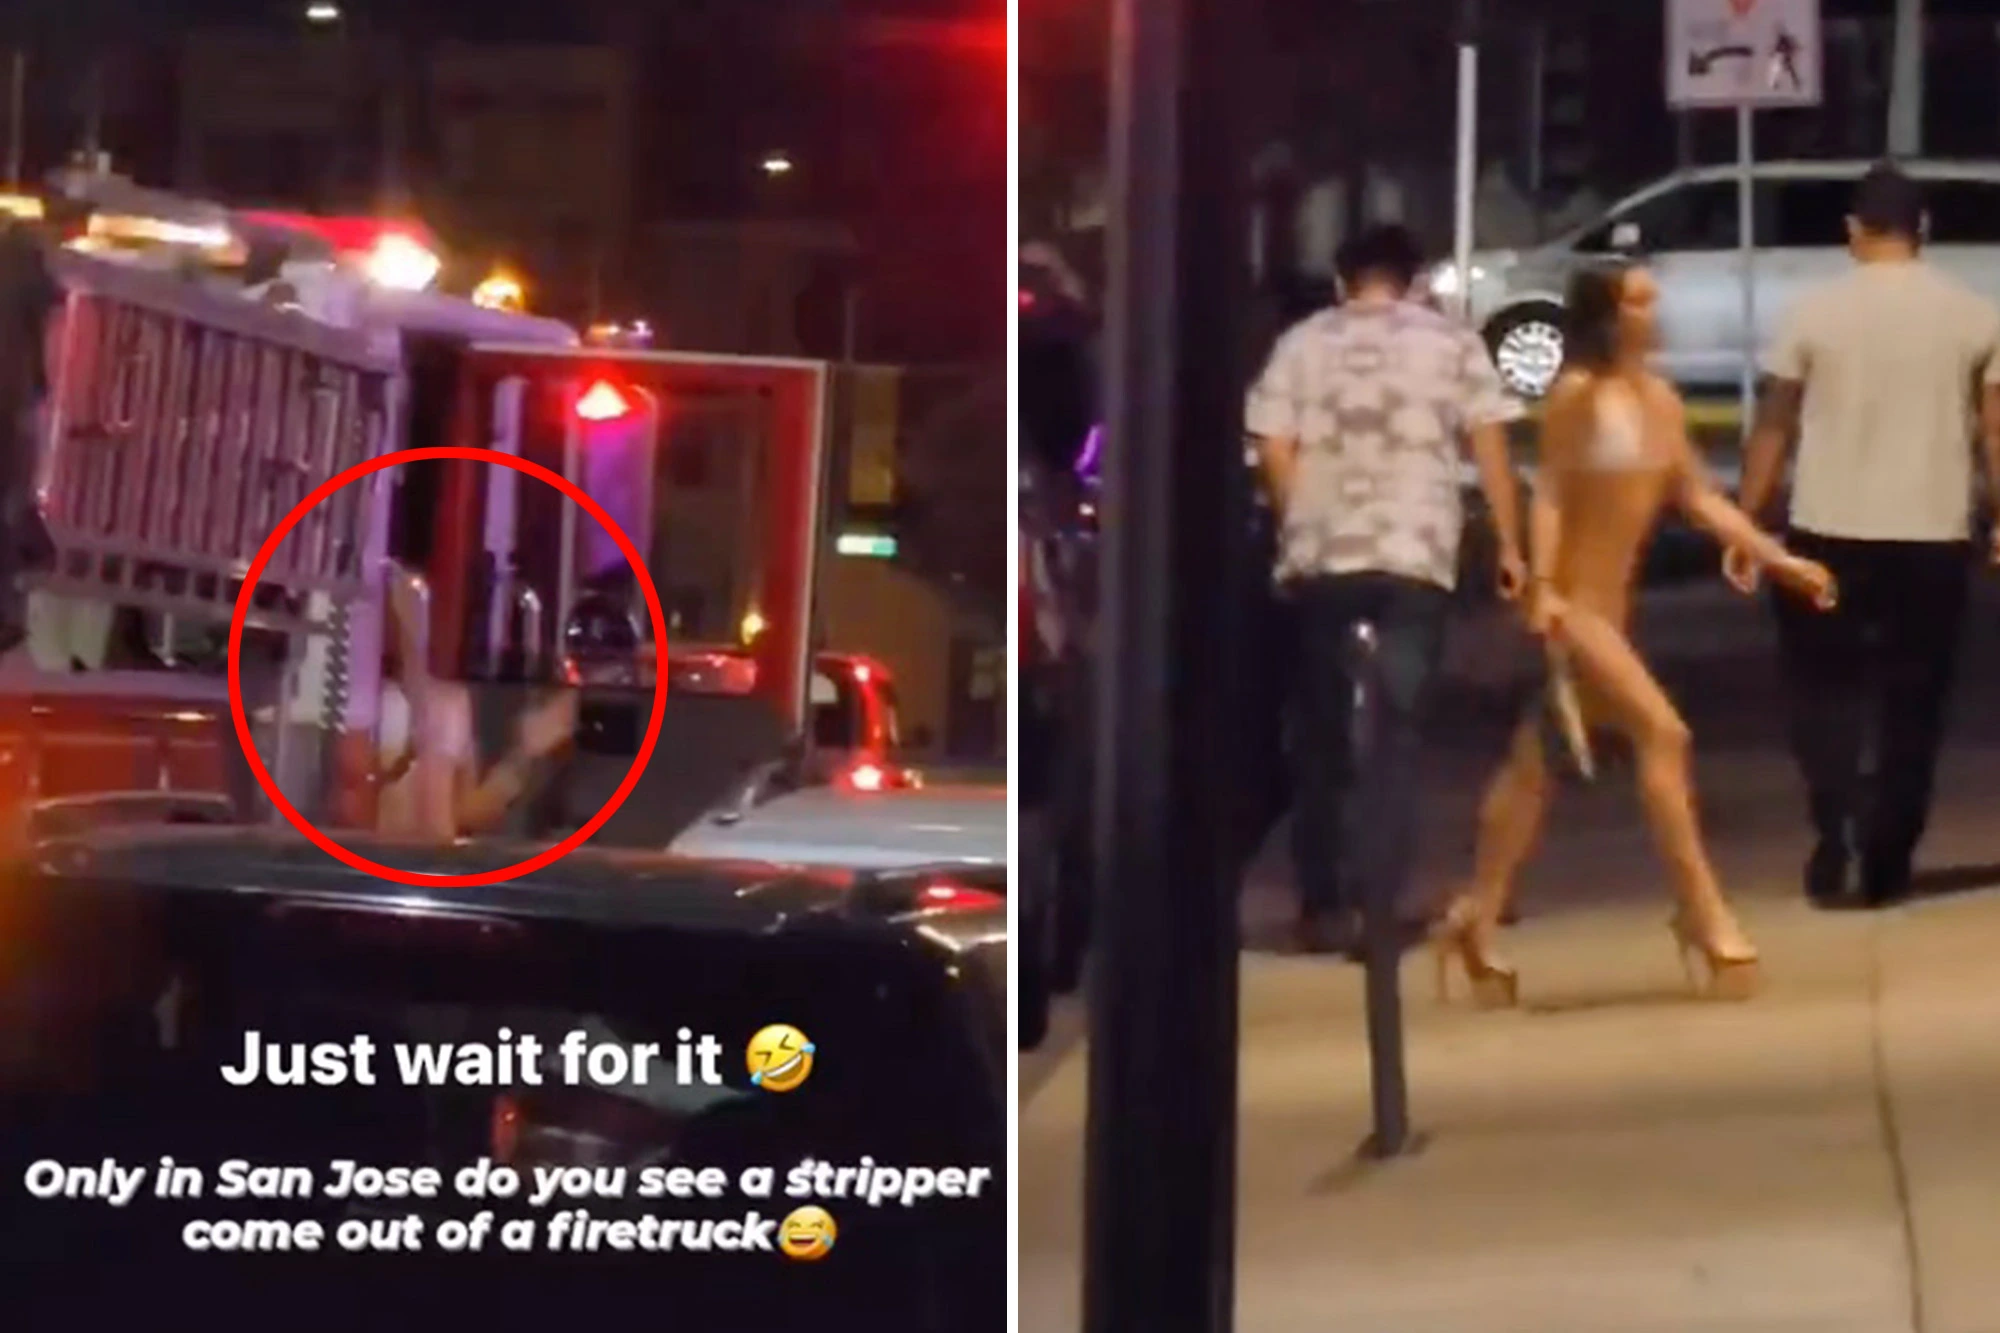 San Jose Concludes Probe Into Video of Bikini-Clad Woman Leaving Fire Truck and Entering Strip Club